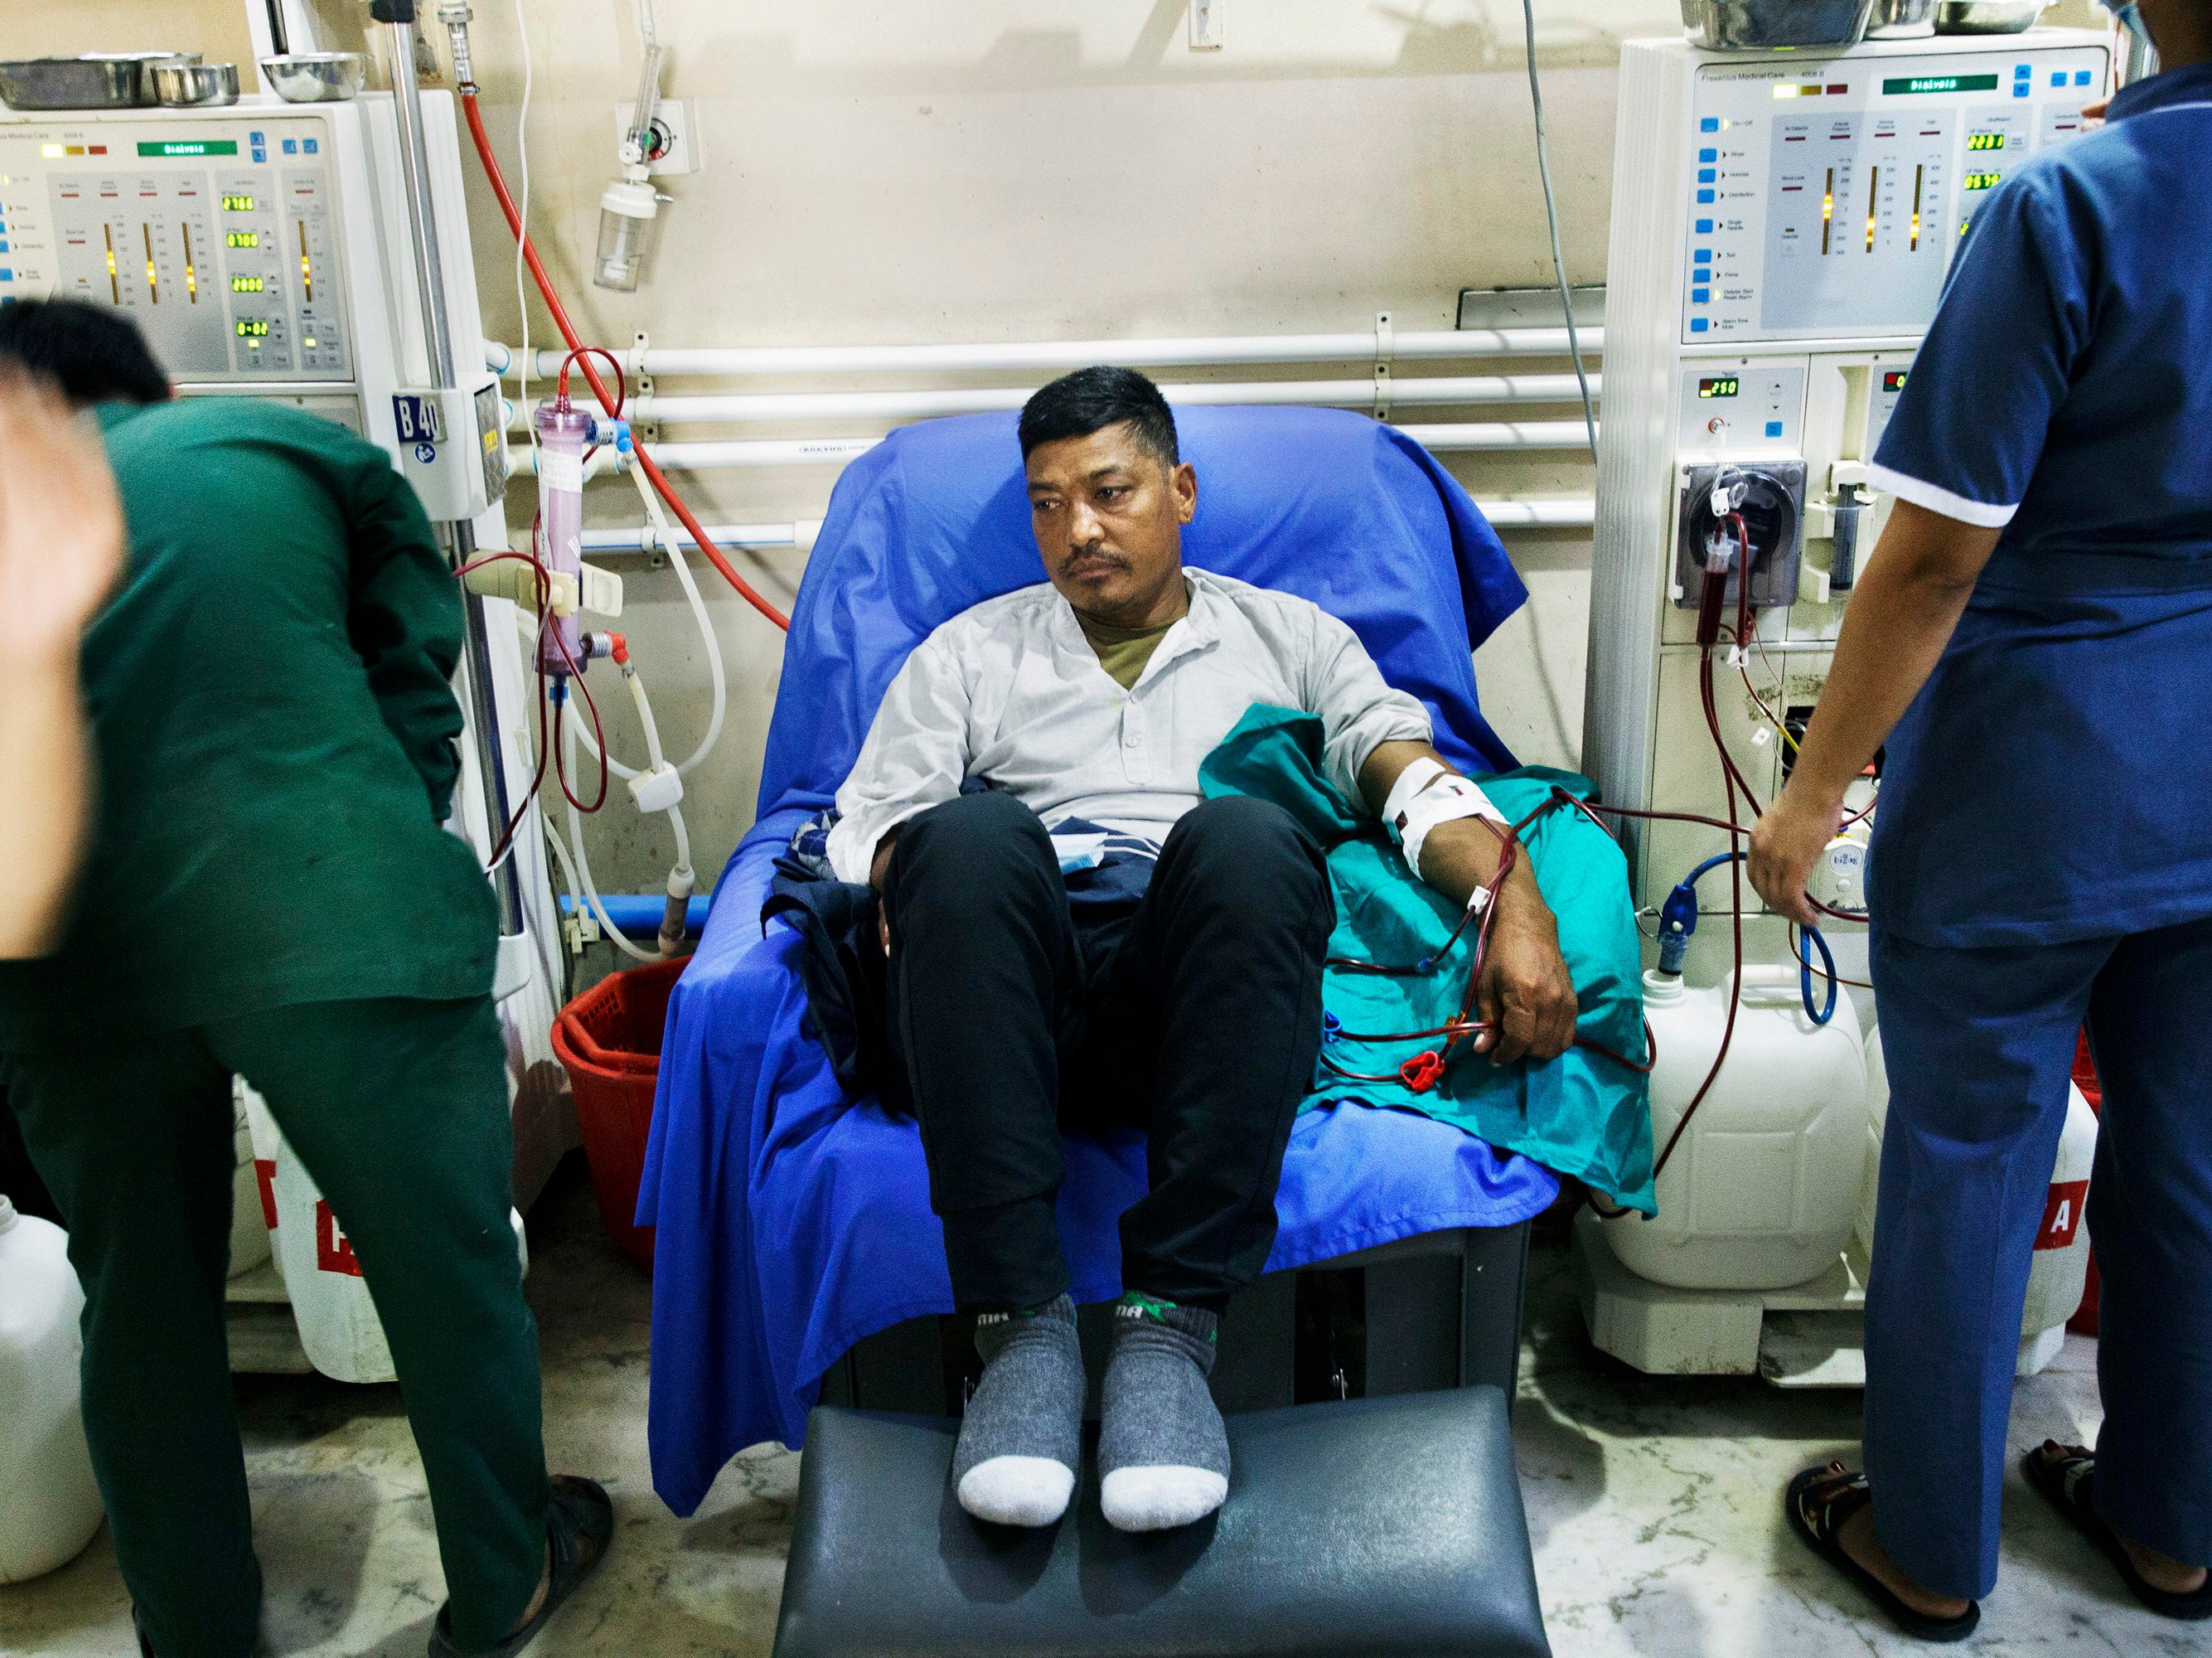 Sak Bahadur Chhantyal was working on a construction site in Oman for six years before he was diagnosed with chronic kidney disease